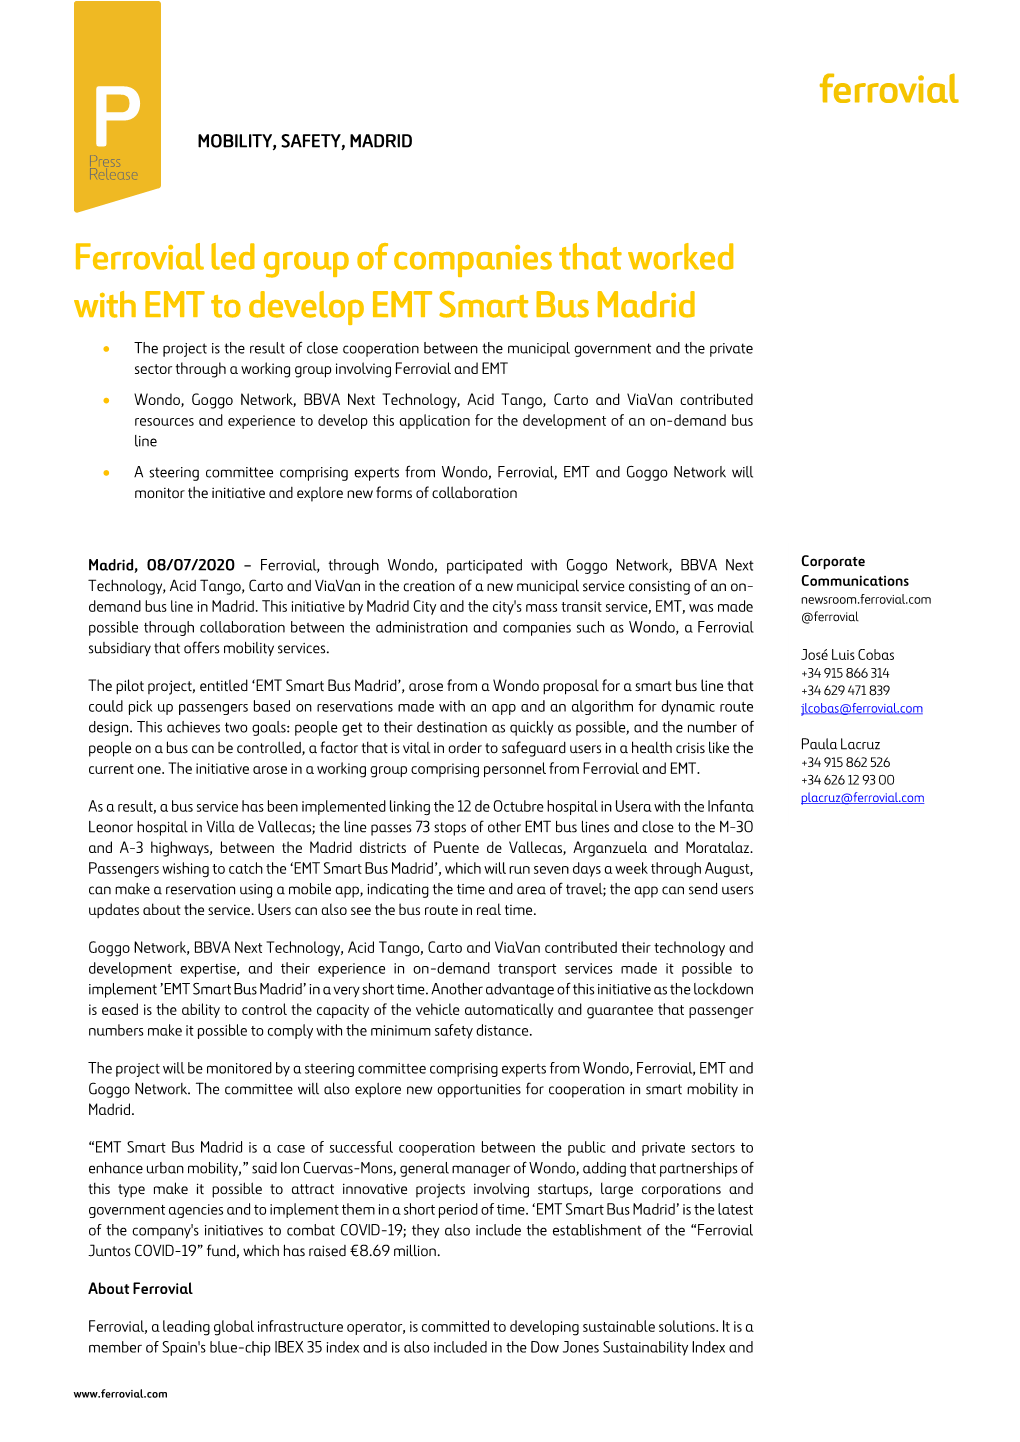 Ferrovial Led Group of Companies That Worked with EMT to Develop EMT